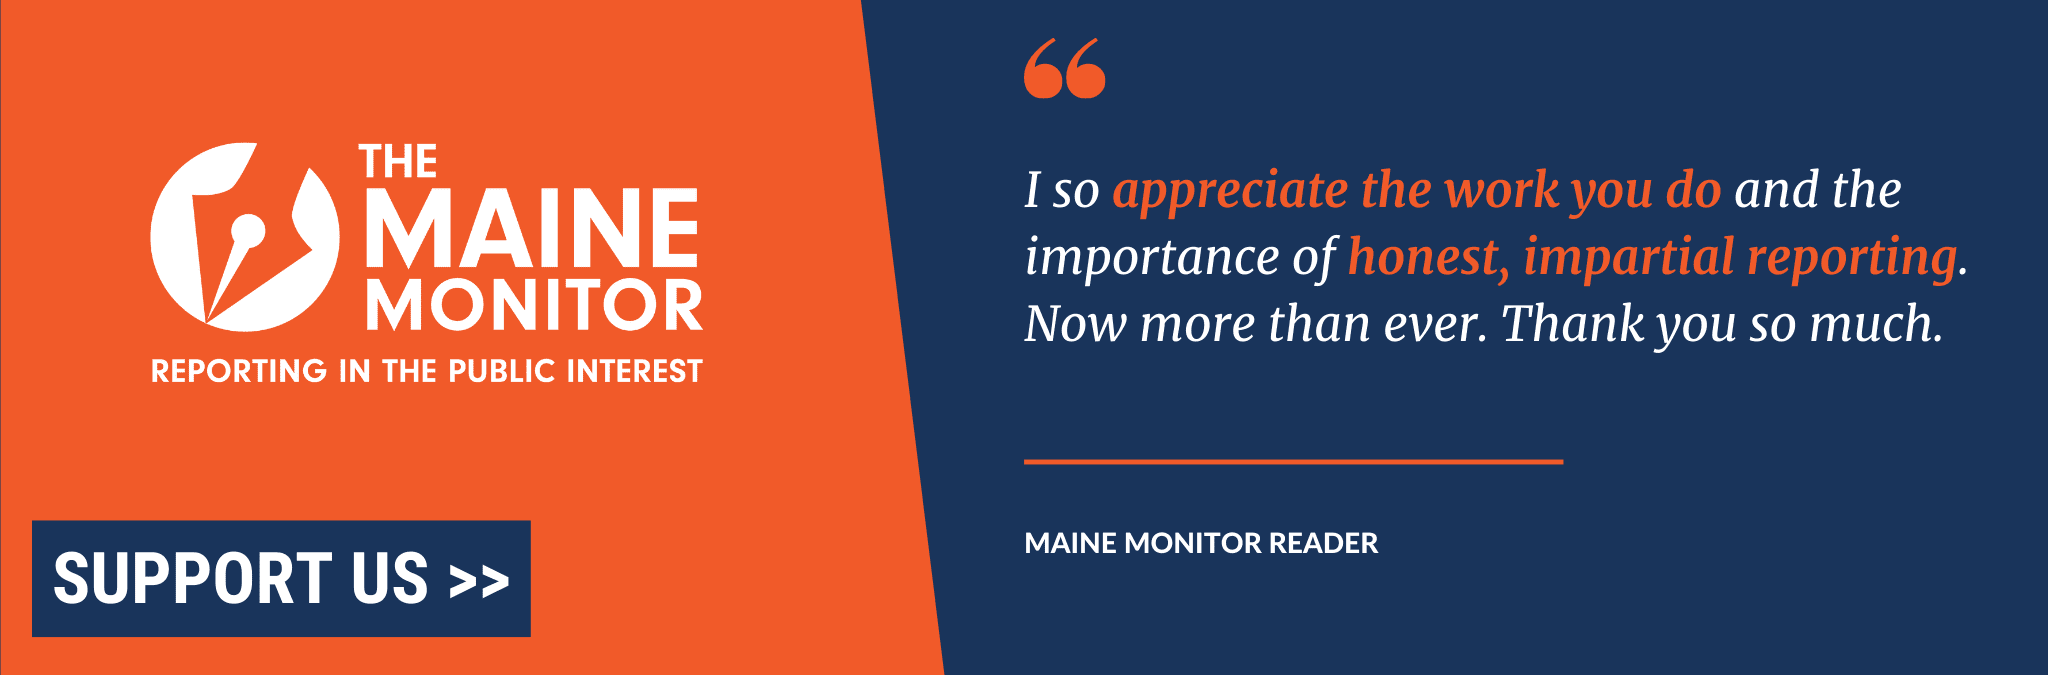 A graphic seeking donations. A quote from a Maine Monitor reader says 